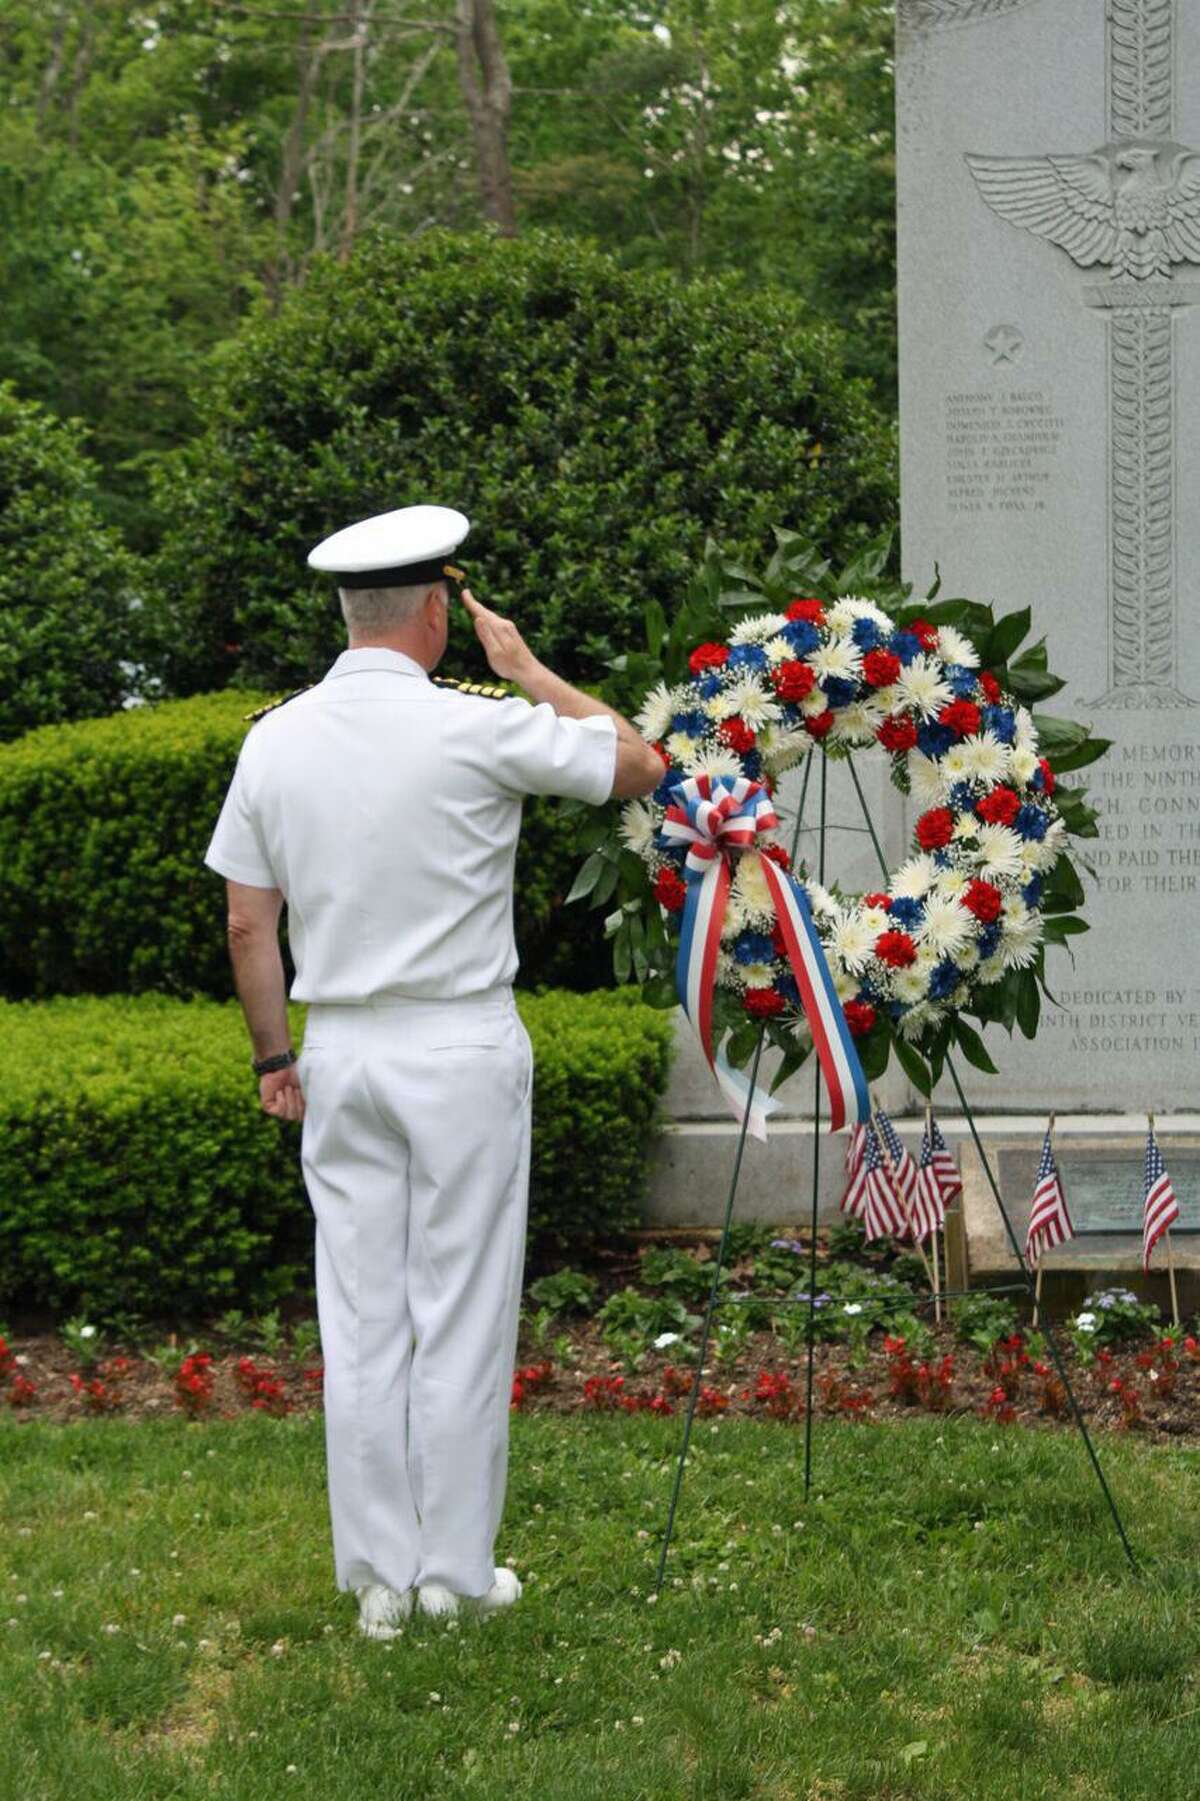 U.S. Navy Capt. Mark Turner, a town resident, salutes a wreath at the Glenville memorial for its annual Memorial Day parade and ceremony.